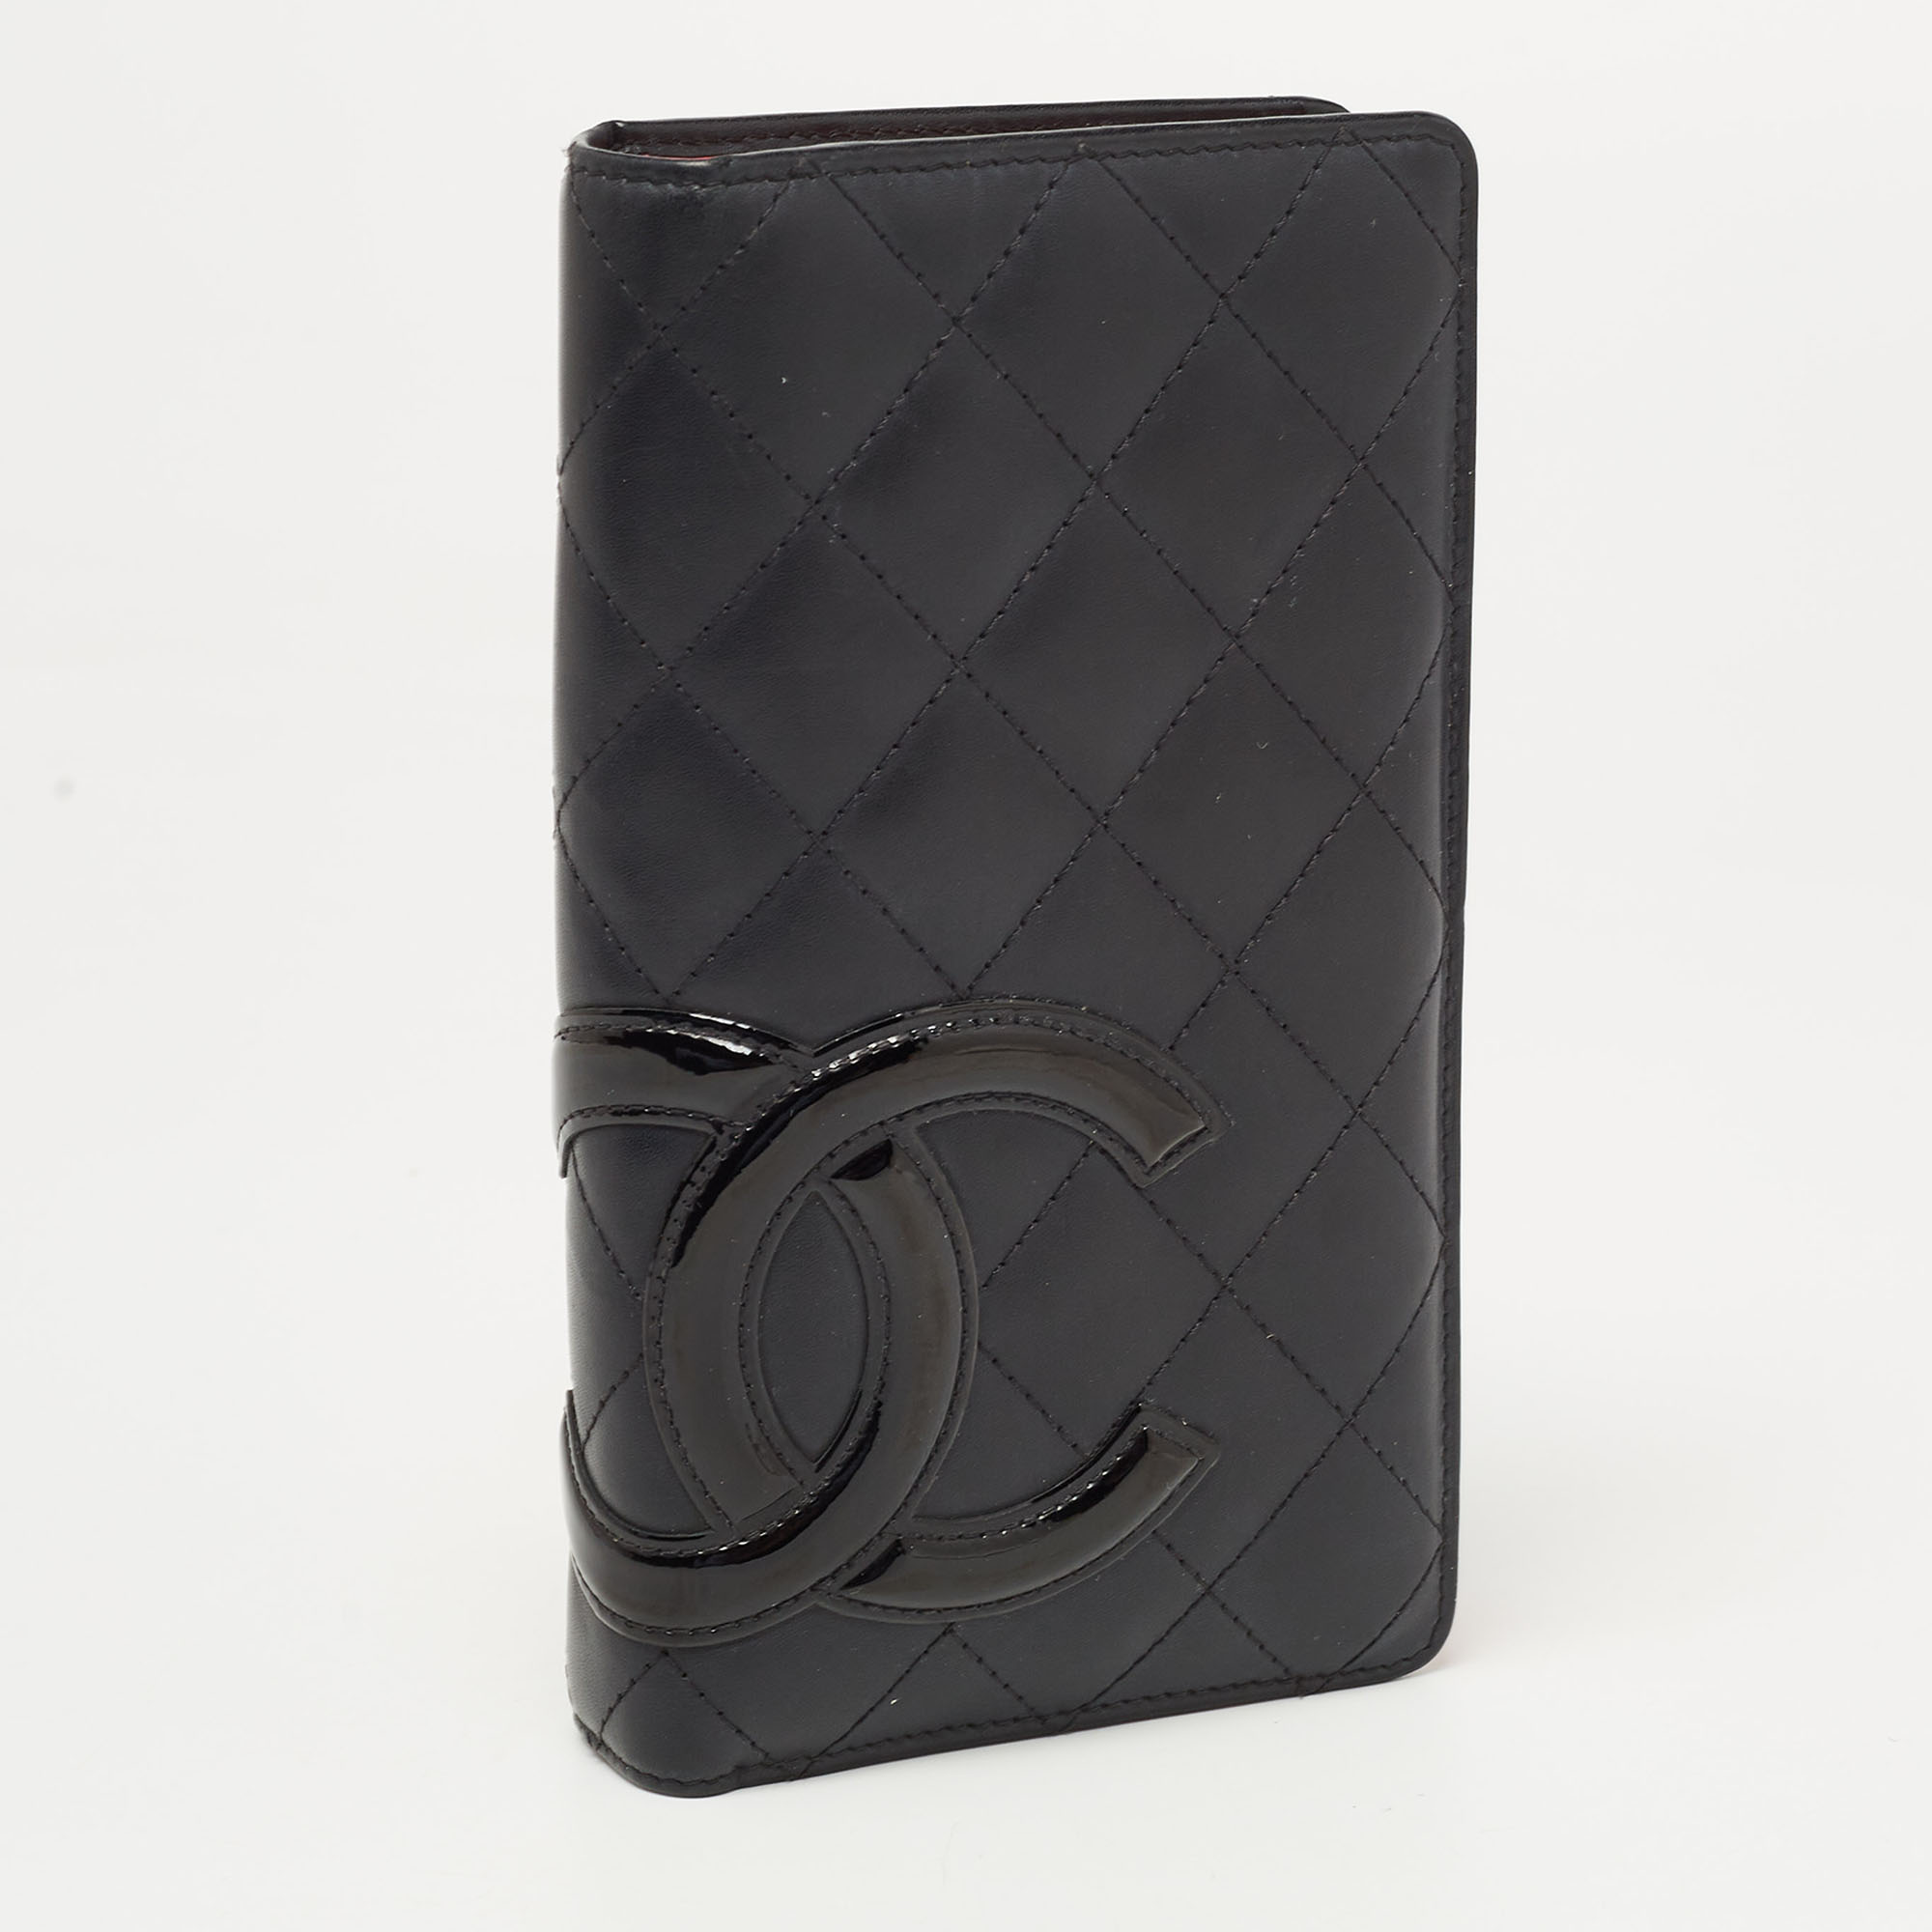 Chanel Black Quilted Leather Cambon Ligne Long Wallet